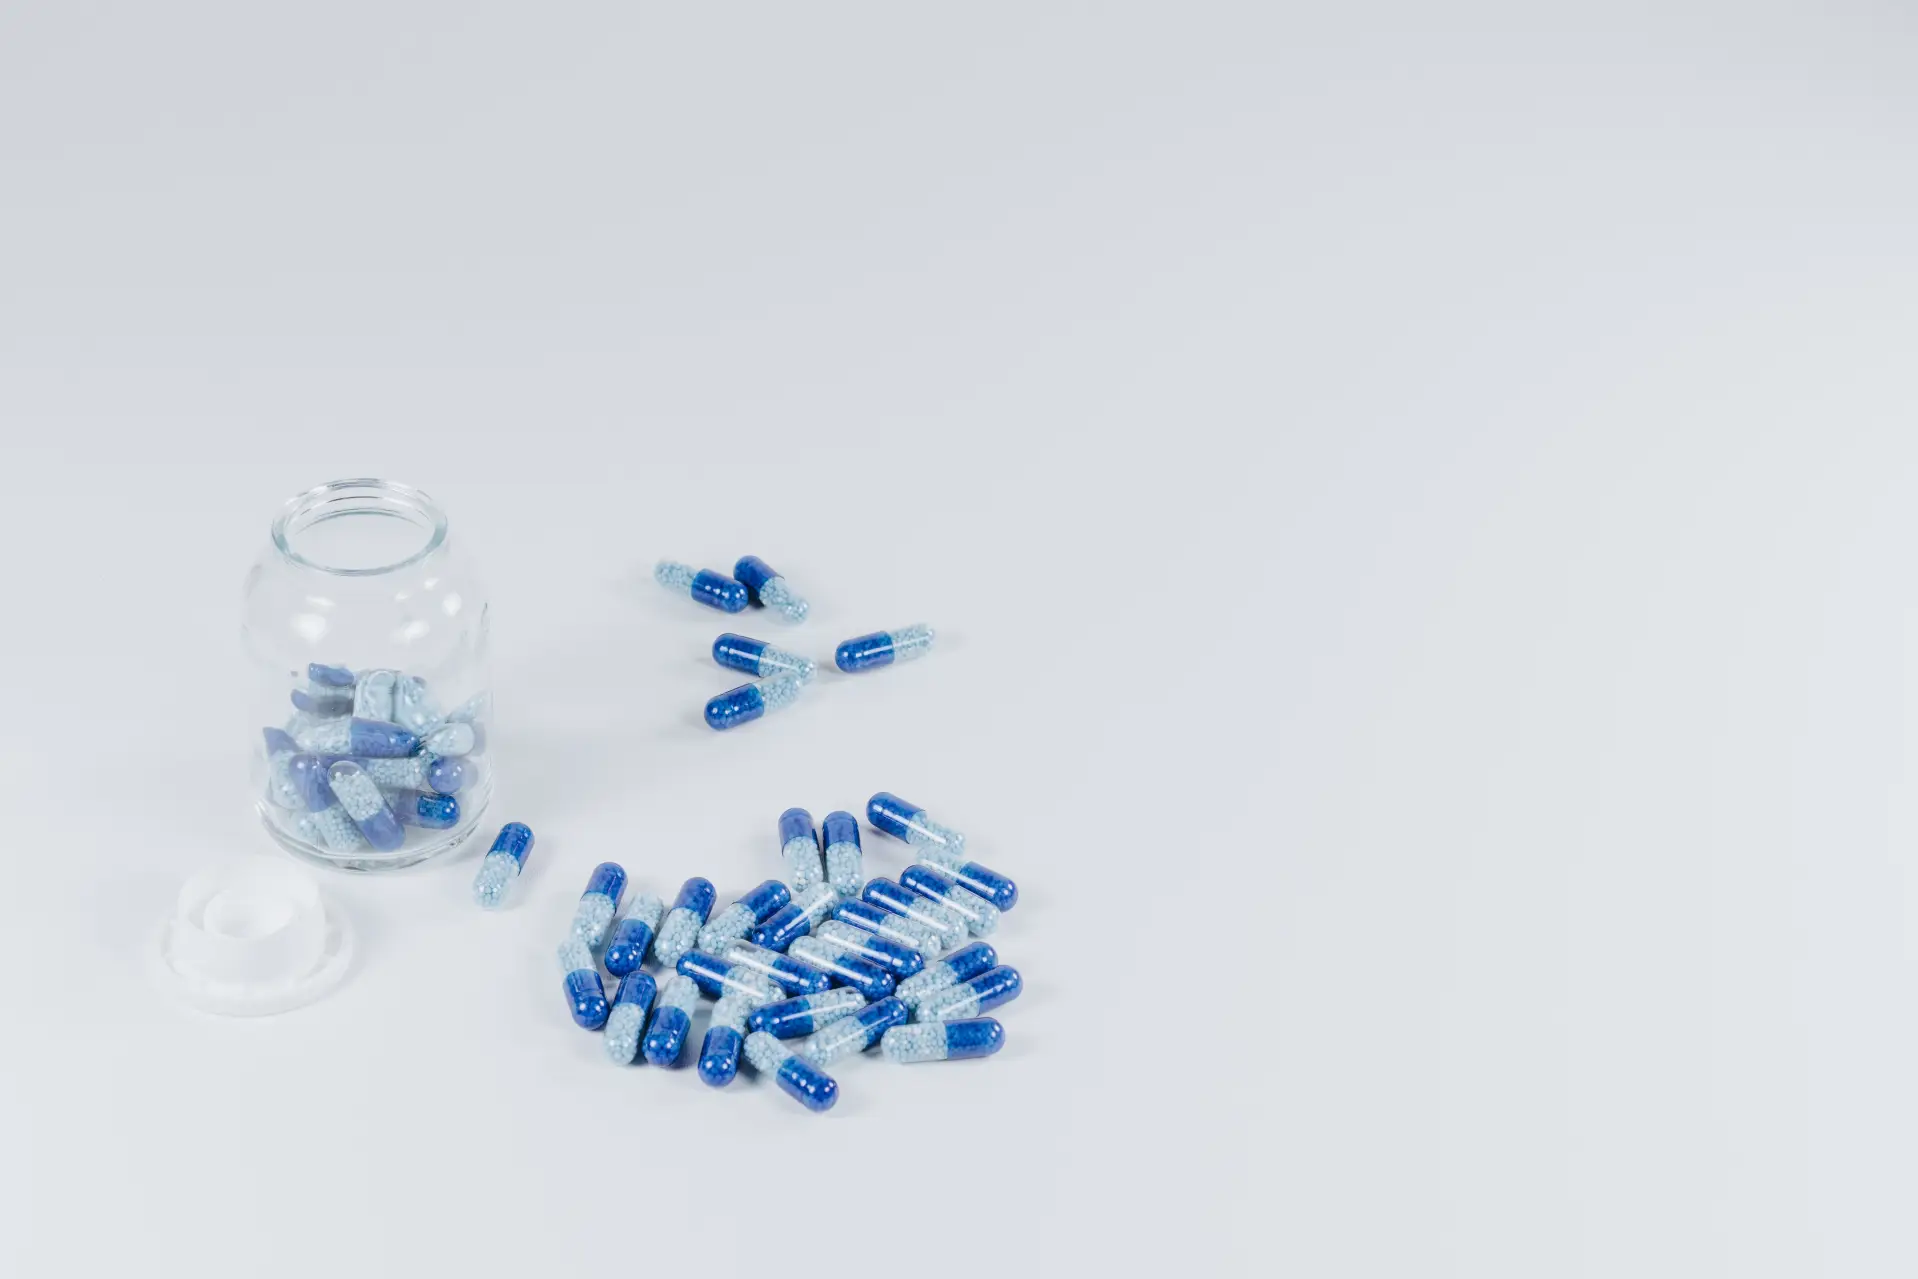 Pills in a glass jar and scattered on a white surface